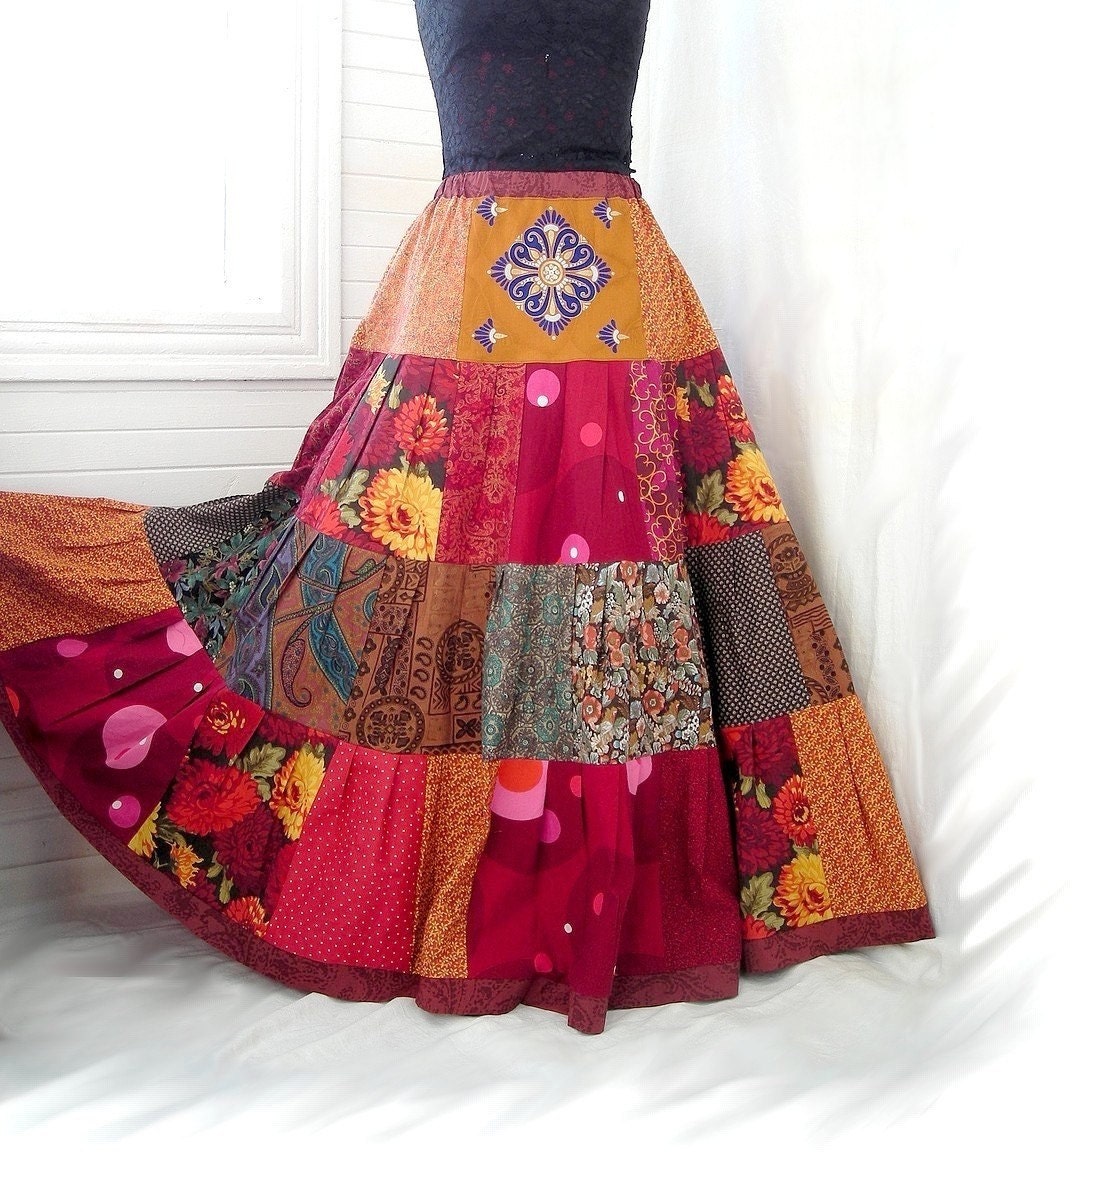 Red Fire Blossoms - Floral Patchwork Boho Gypsy Skirt, 19-foot hem, Sizes - S, M, L, XL